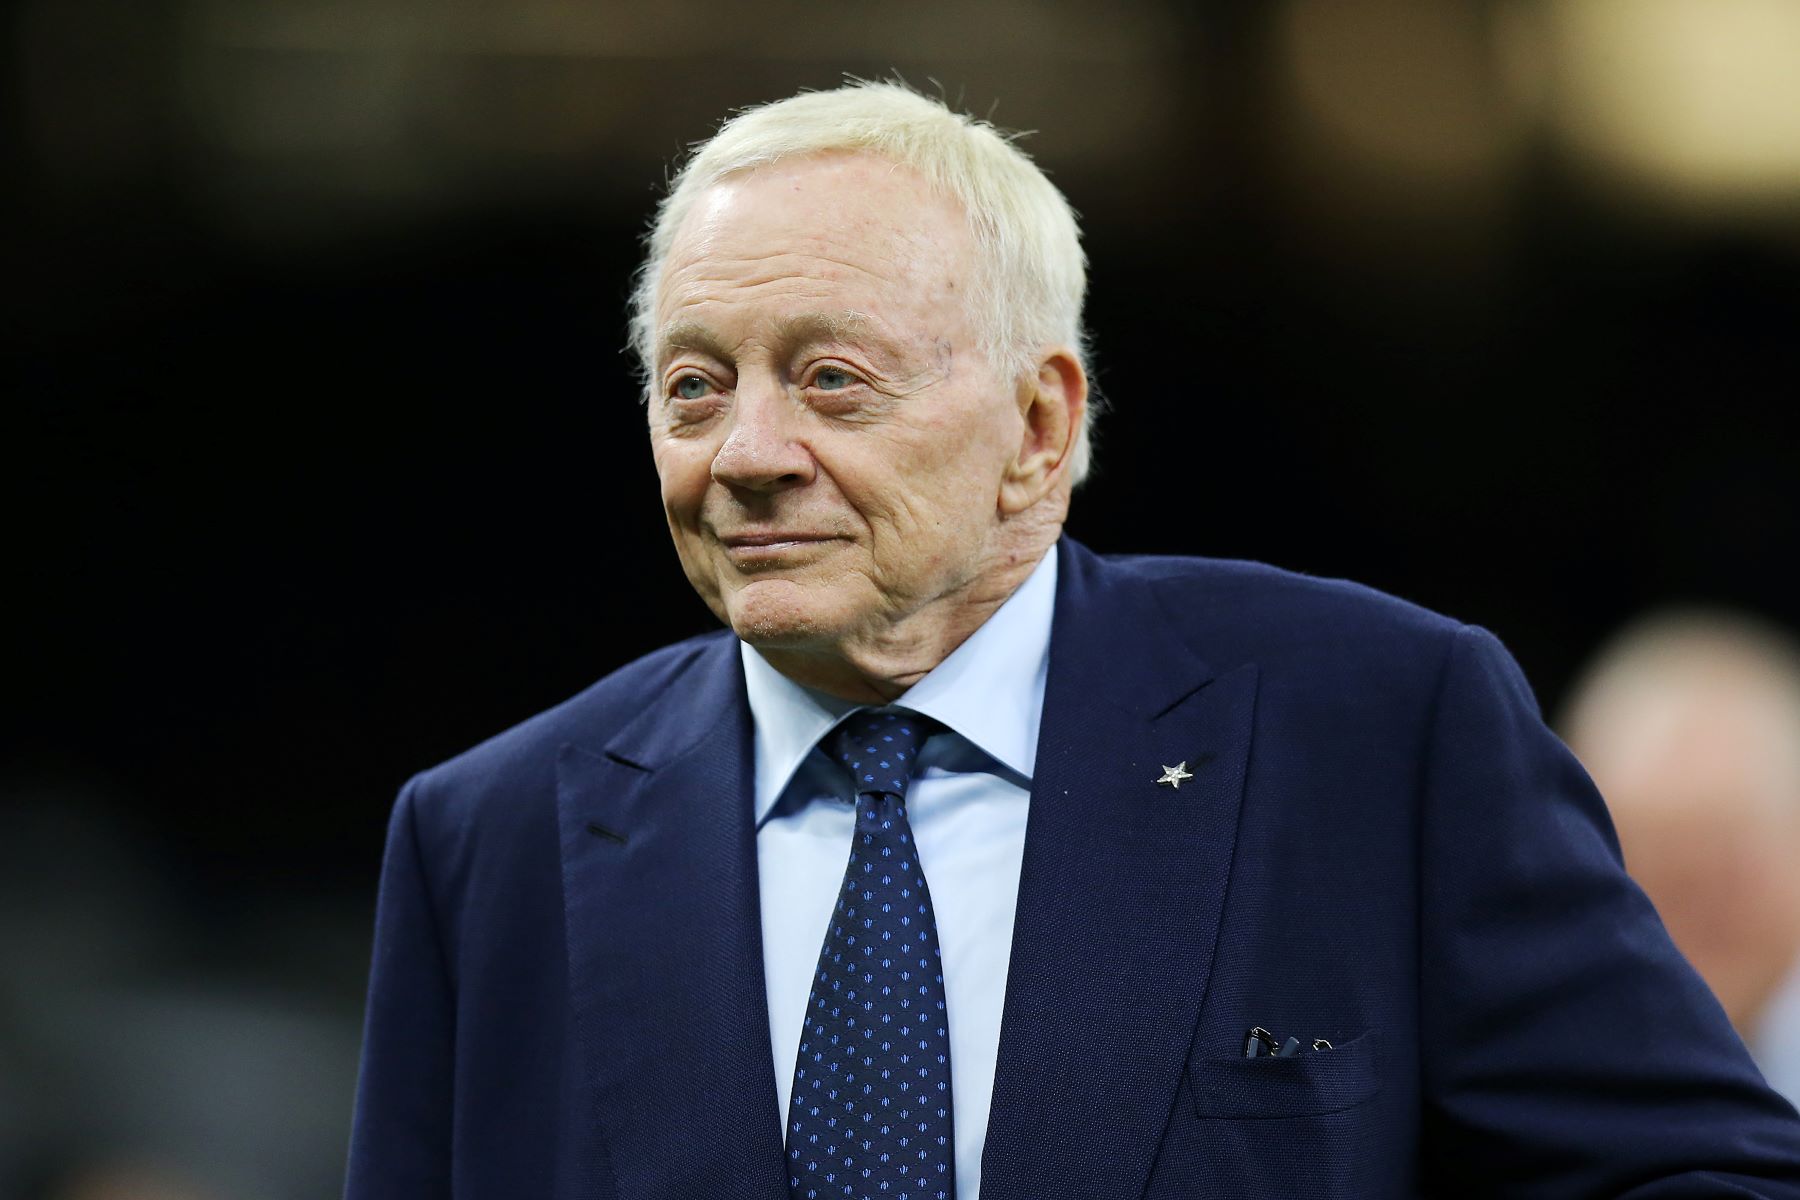 NFL team Dallas Cowboys owner Jerry Jones at a warm up session before a game against the New Orleans Saints